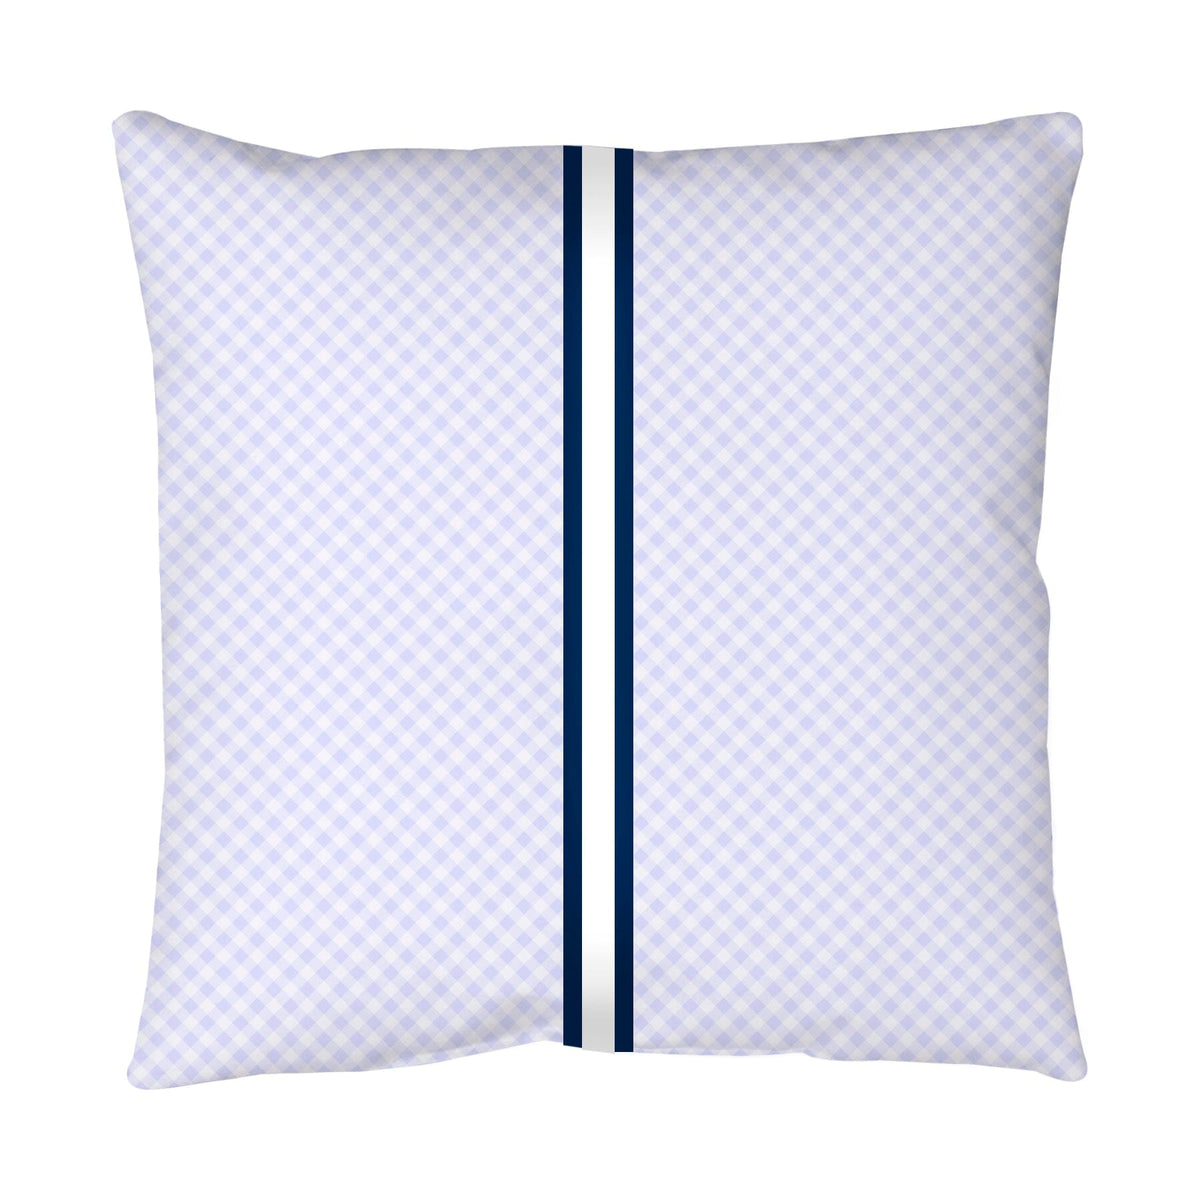 Euro/Floor Pillow - Gingham Lavender Bedding Collections, Pillows, Floor Pillows MWW 